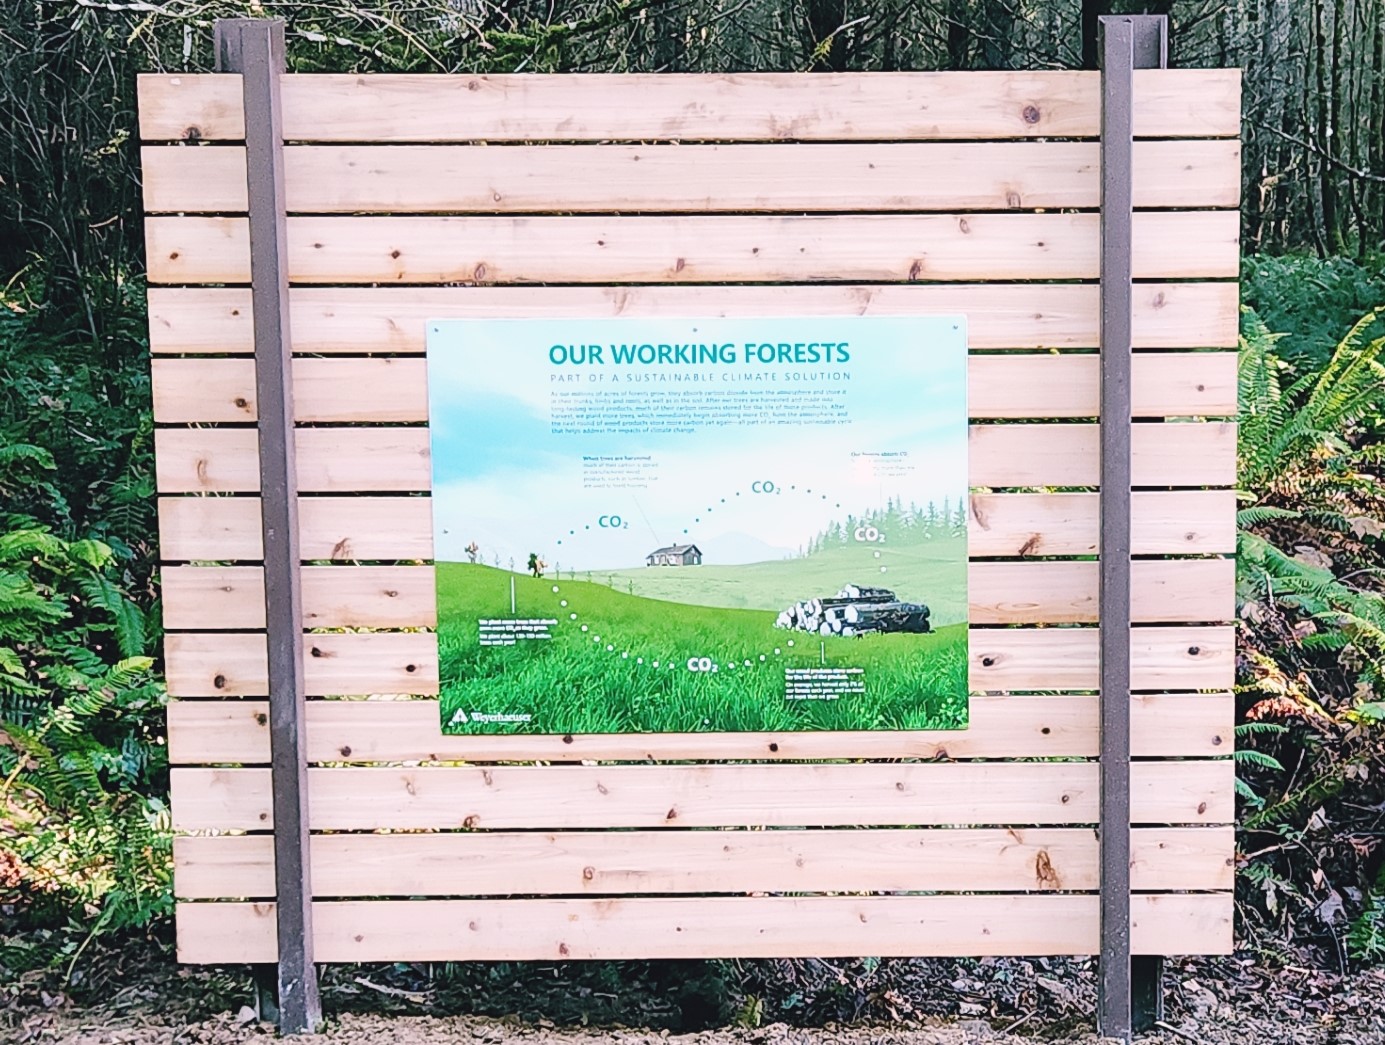 Image of the working forests sign set in the thick of the woods.